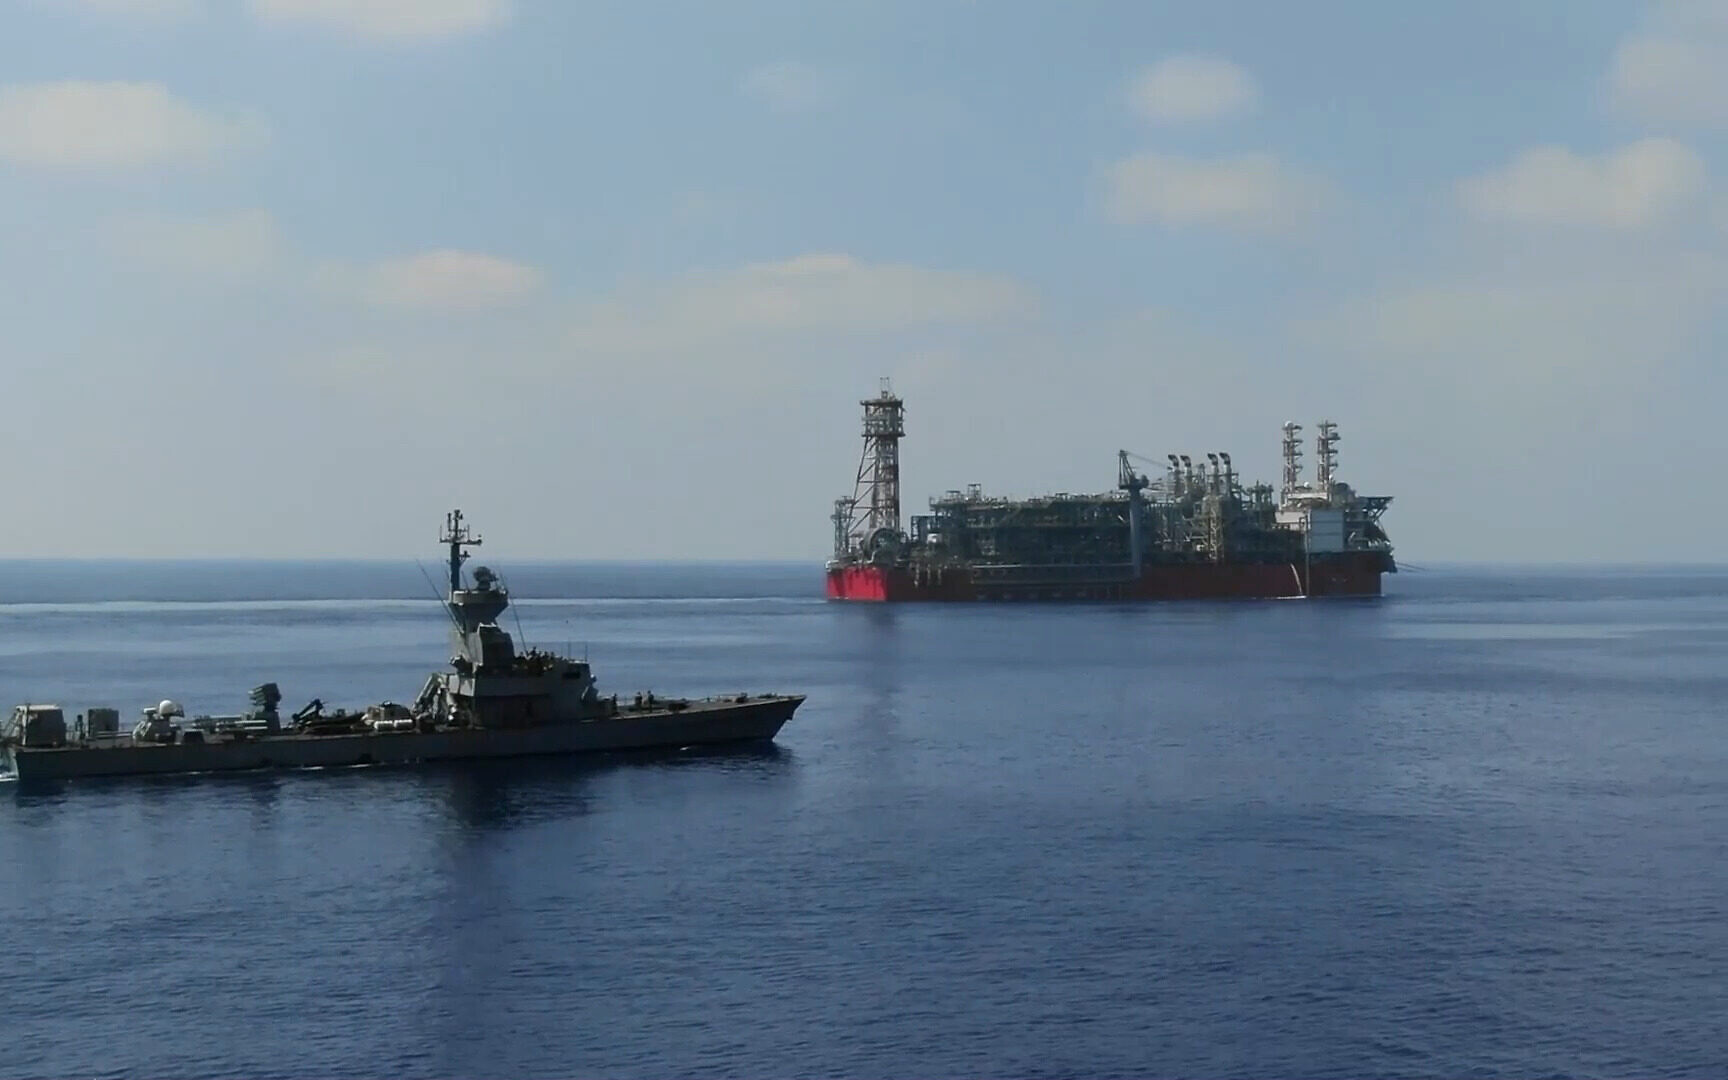 An Israeli Sa’ar Class 4.5 missile boat guards the Energean floating production, storage and offloading vessel at the Karish gas field, in footage published by the military on July 2, 2022. (Israel Defense Forces)